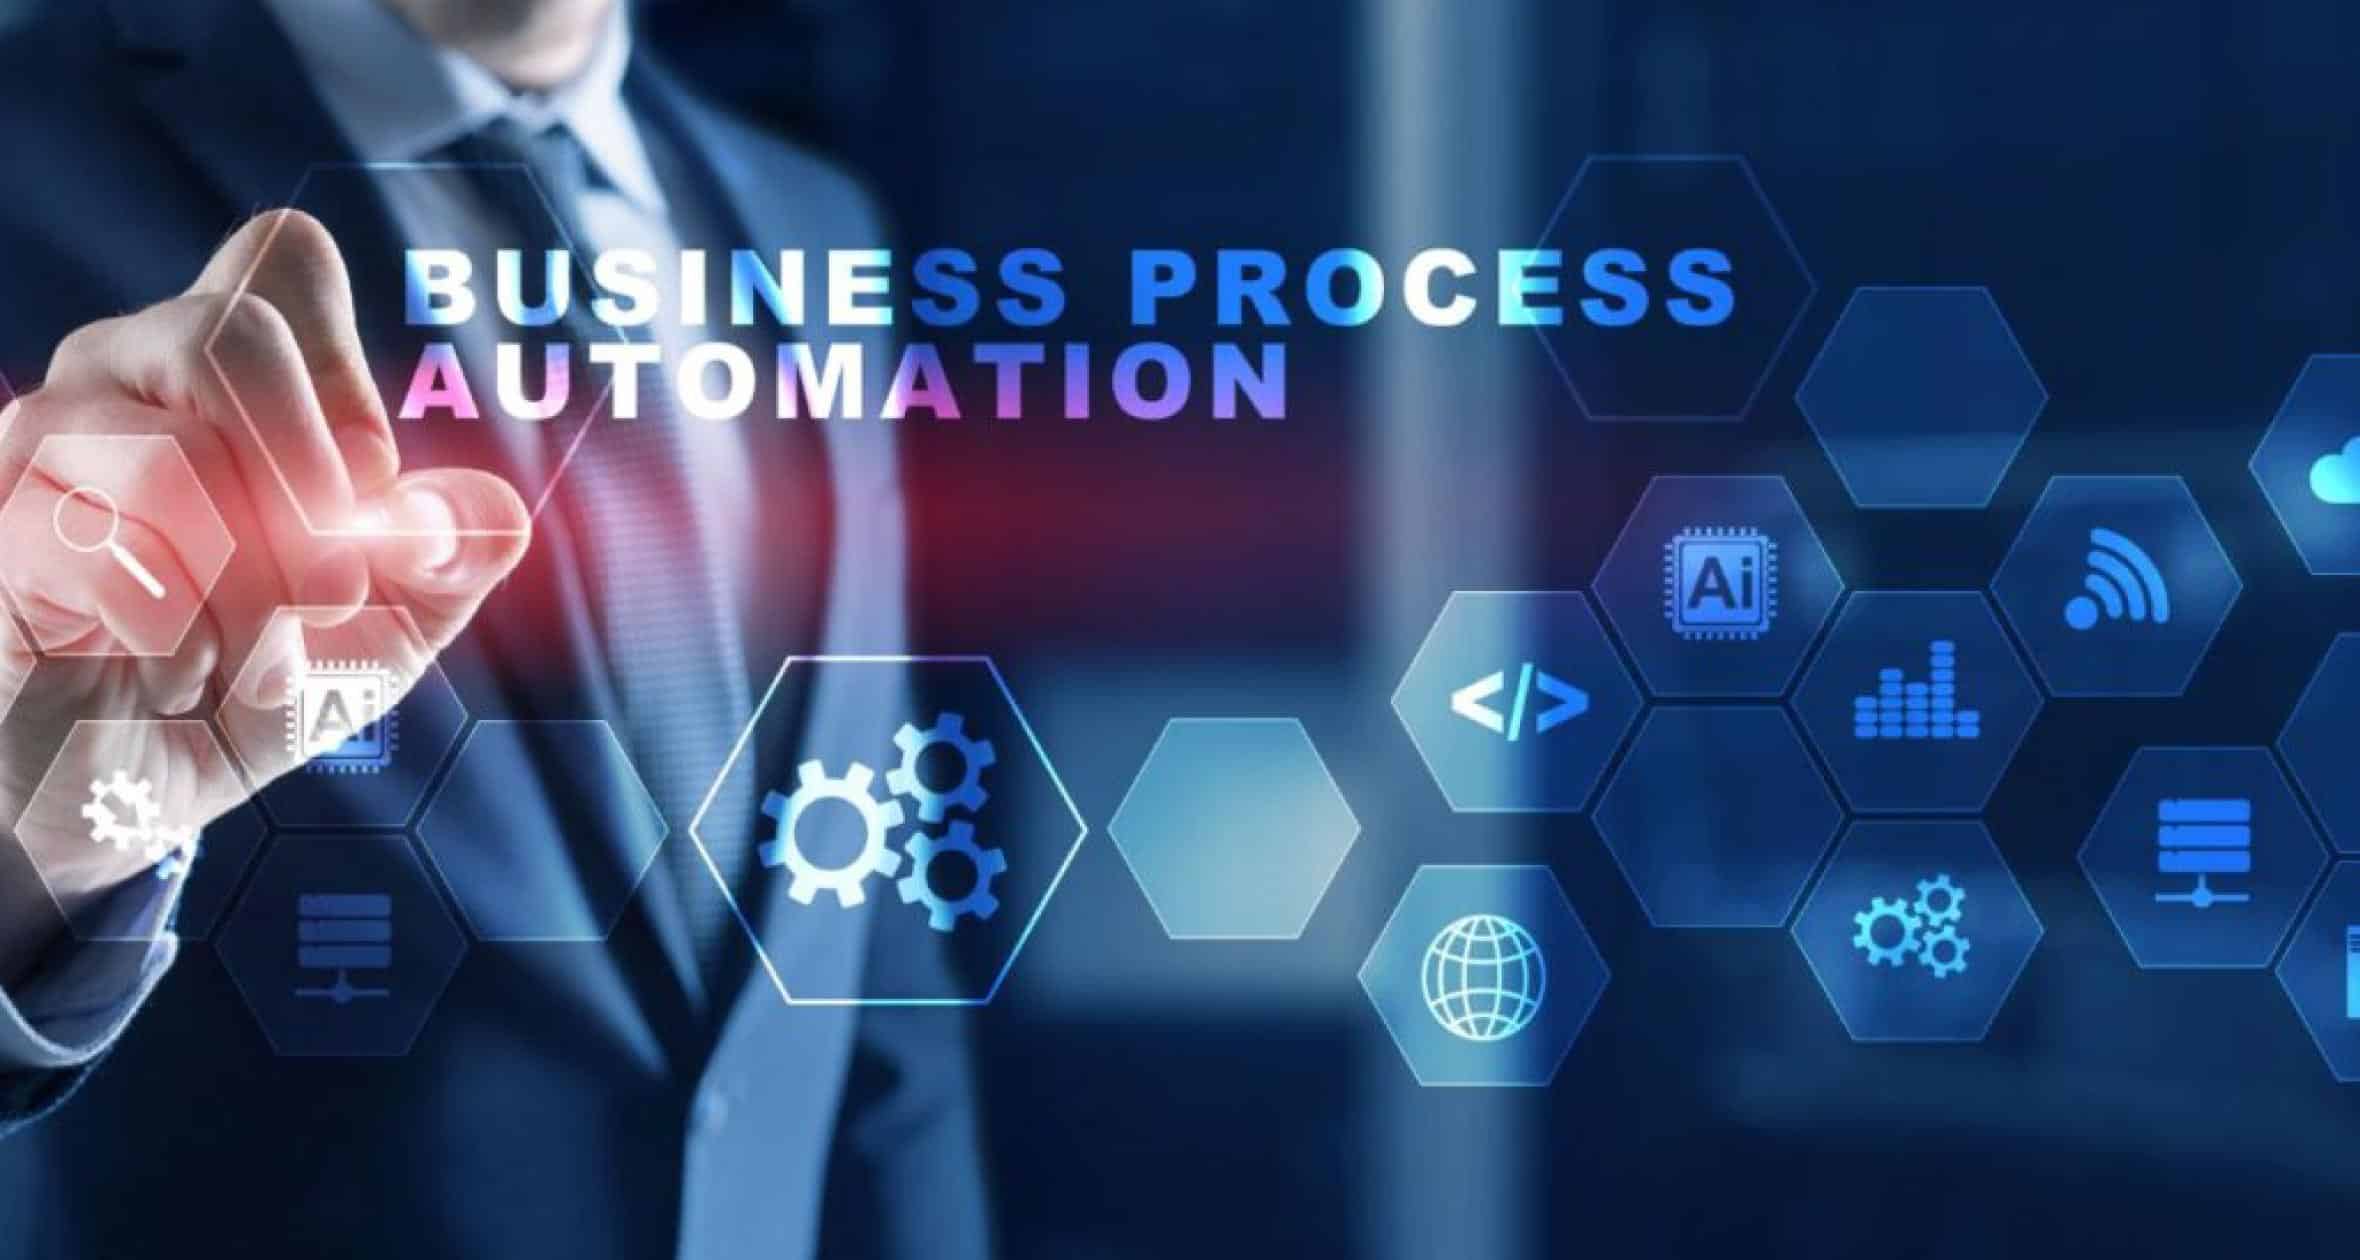 Drive E-Commerce Revenue and Cut Costs with Process Automation